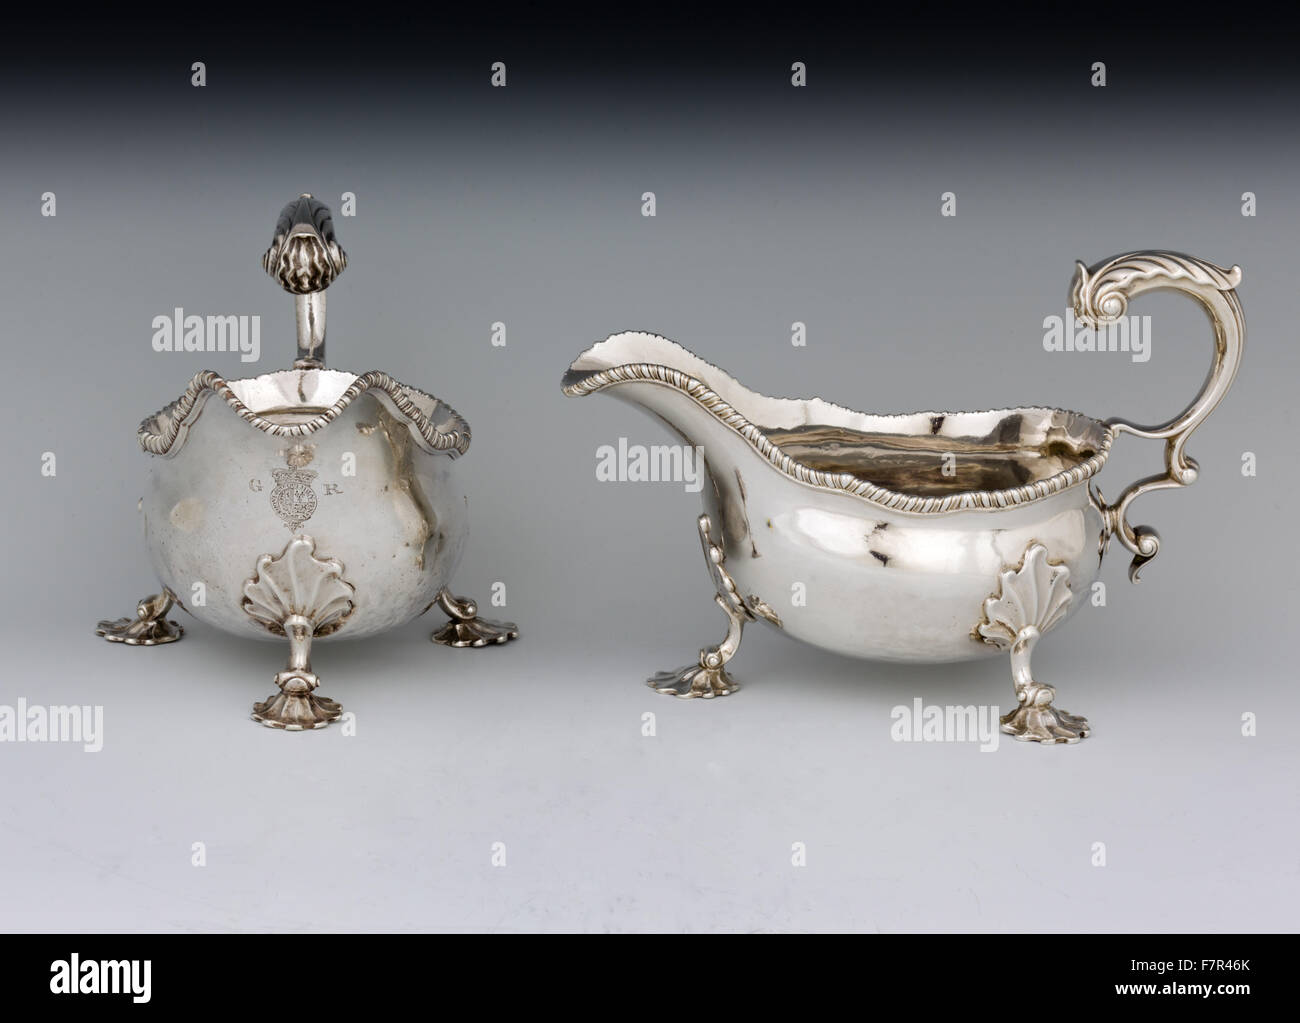 Sauce boats, Simon le Sage, 1758, silver at Ickworth, Suffolk. National Trust Inventory number 852122. Stock Photo